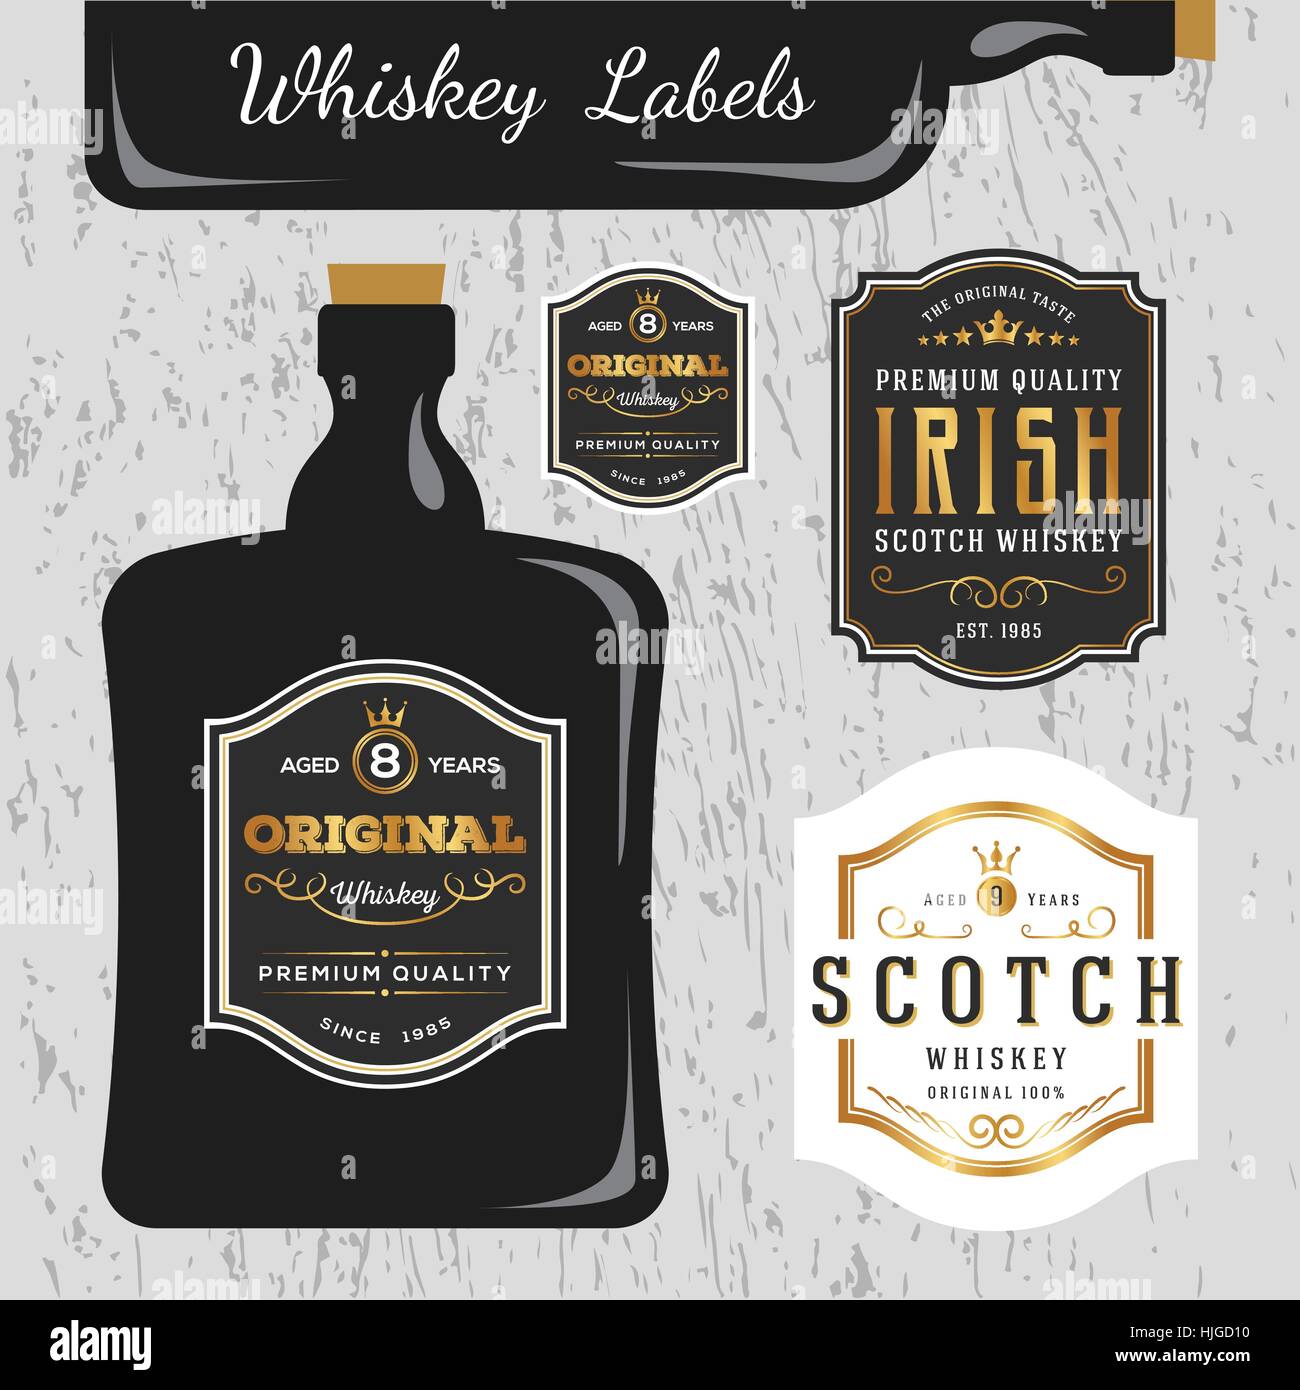 Whiskey Brands Label Design Template, Resize able and free font used Stock Vector